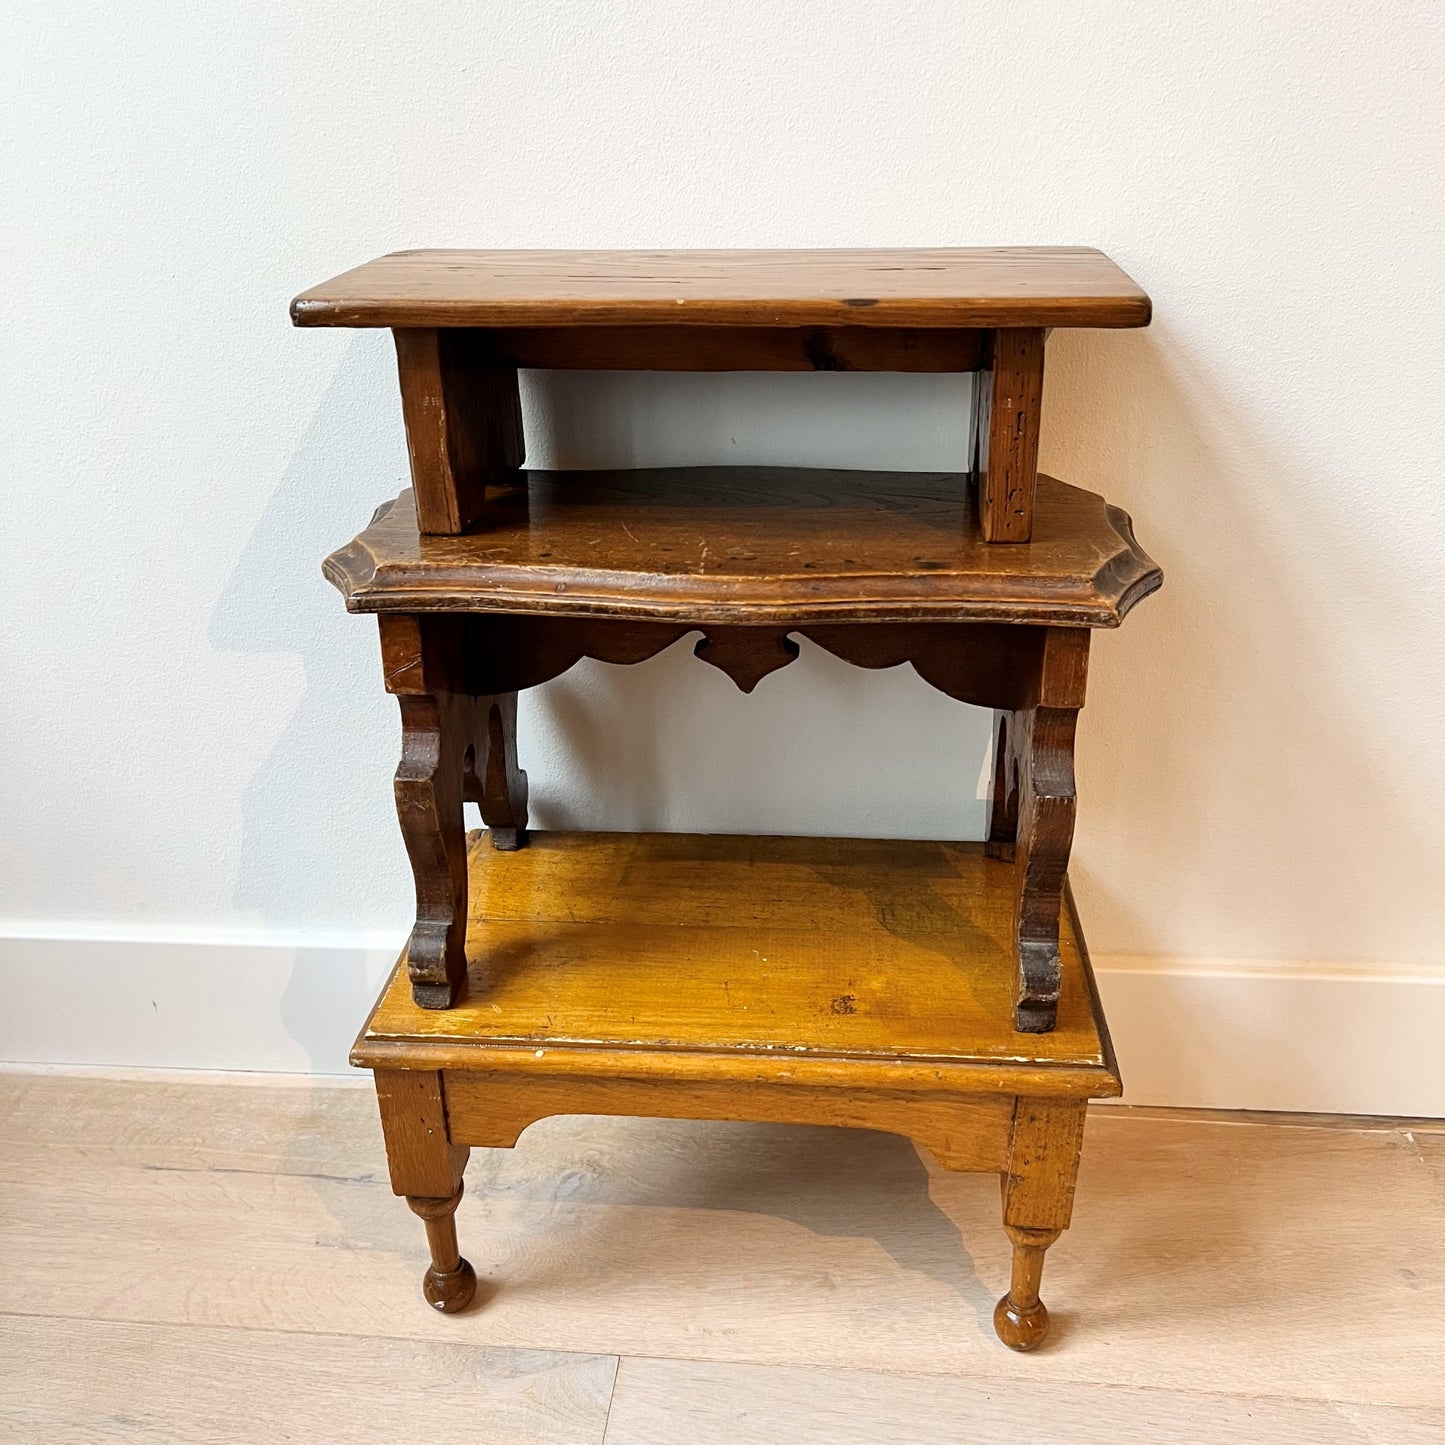 【Vintage】France - 1950s Small Wooden Stand A